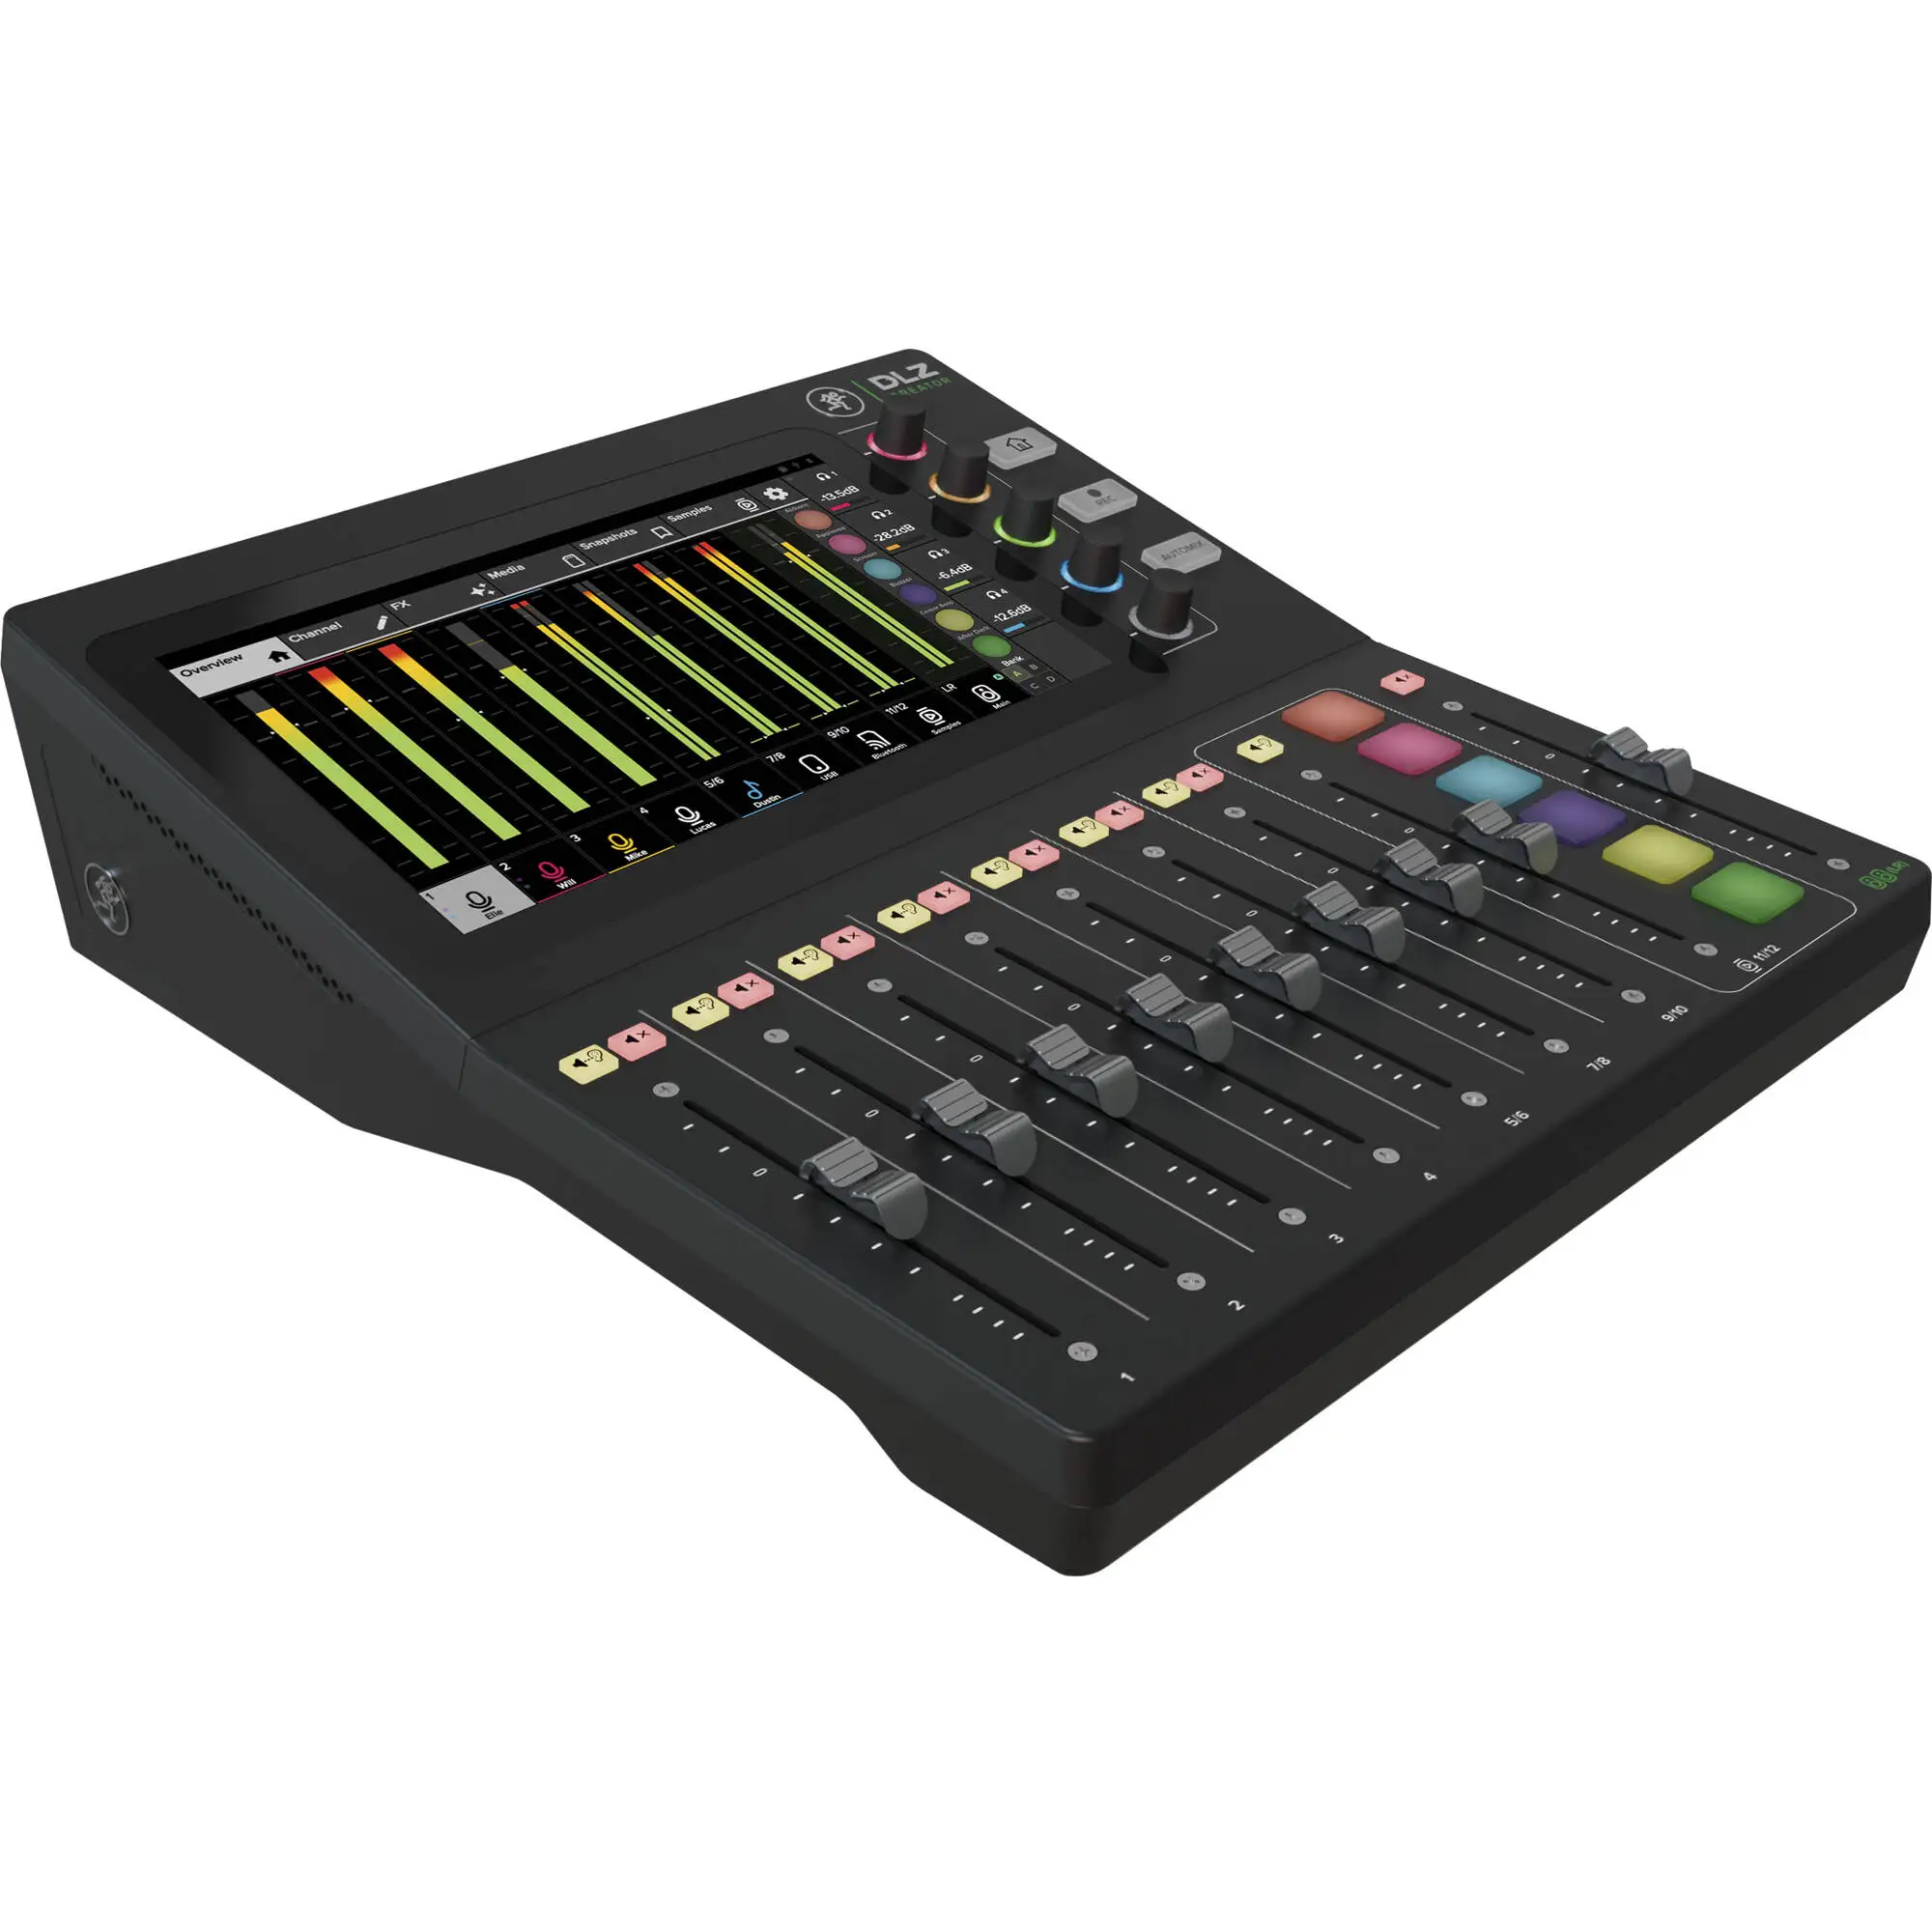 

100% OFFICIAL Mackie DLZ Creator Adaptive Digital Mixer for Podcasting And Streaming